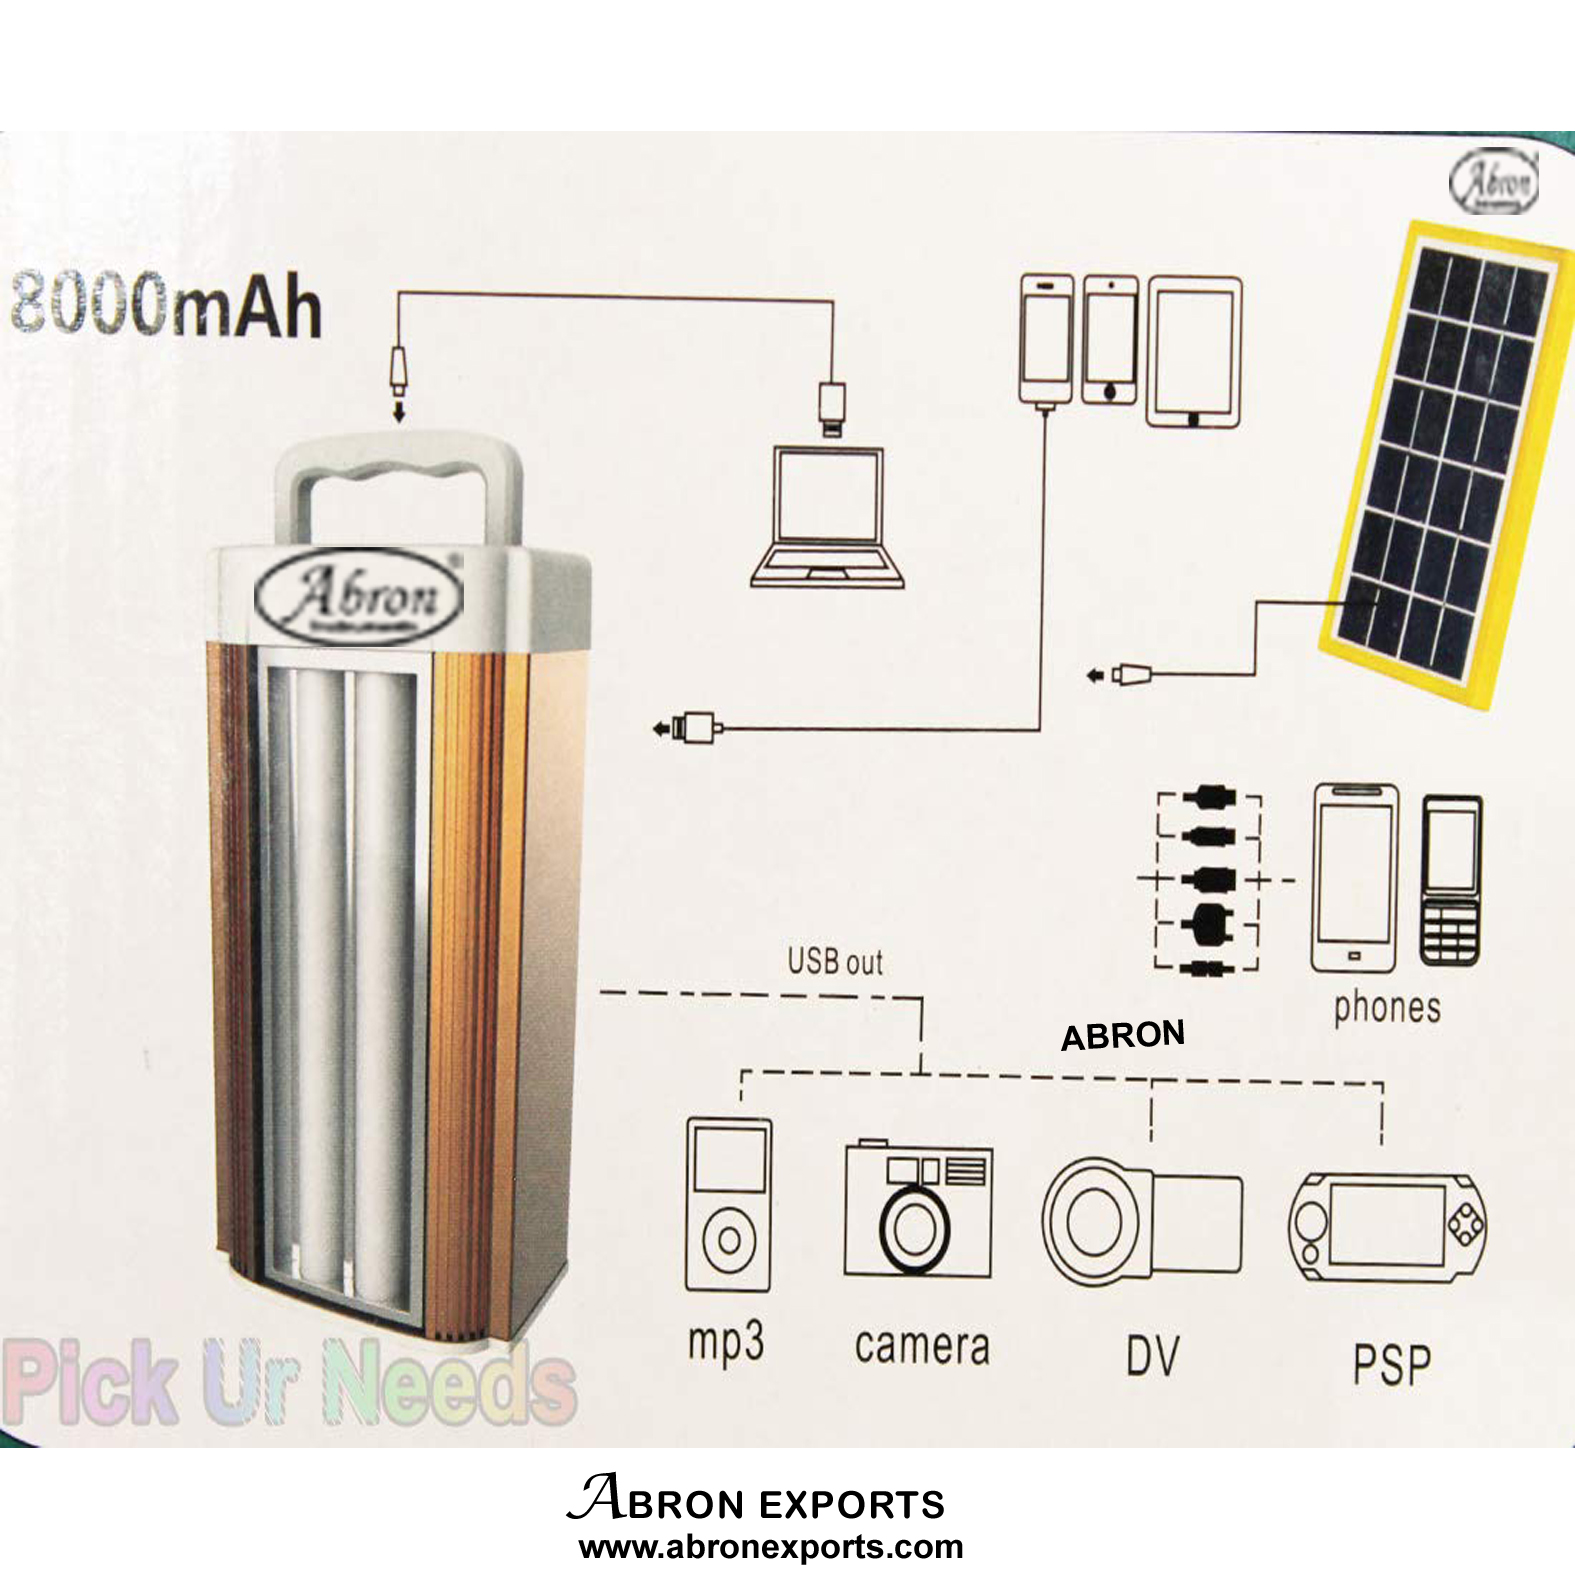 Inverter solar pane 150W with  12V battery with LED Indicator Charging / main / inverter AE-1291S15  